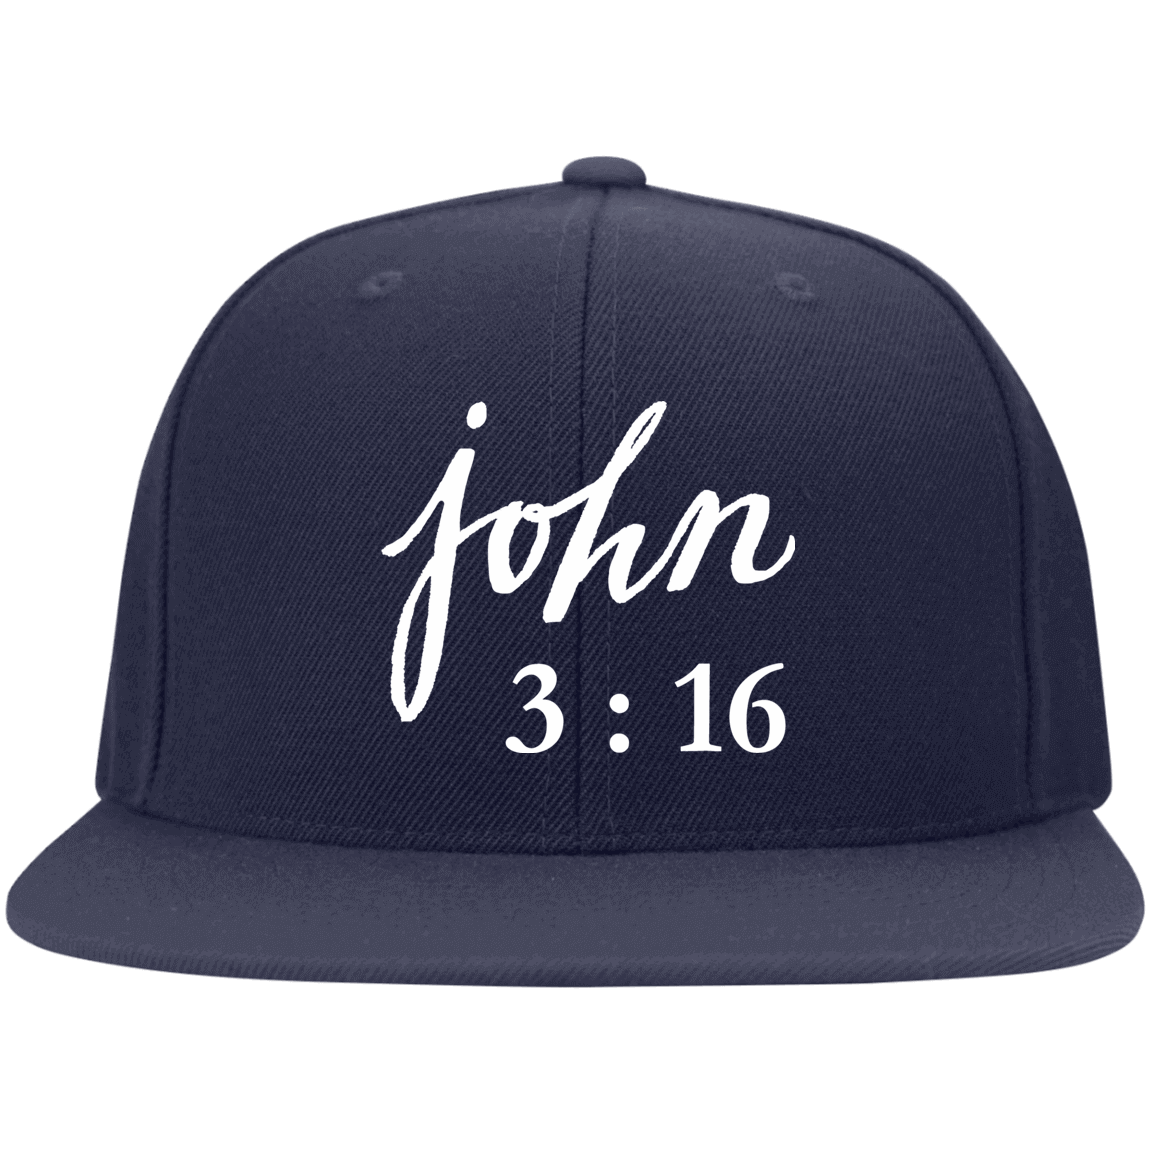 John 3:16 Embroidered Fitted Cap